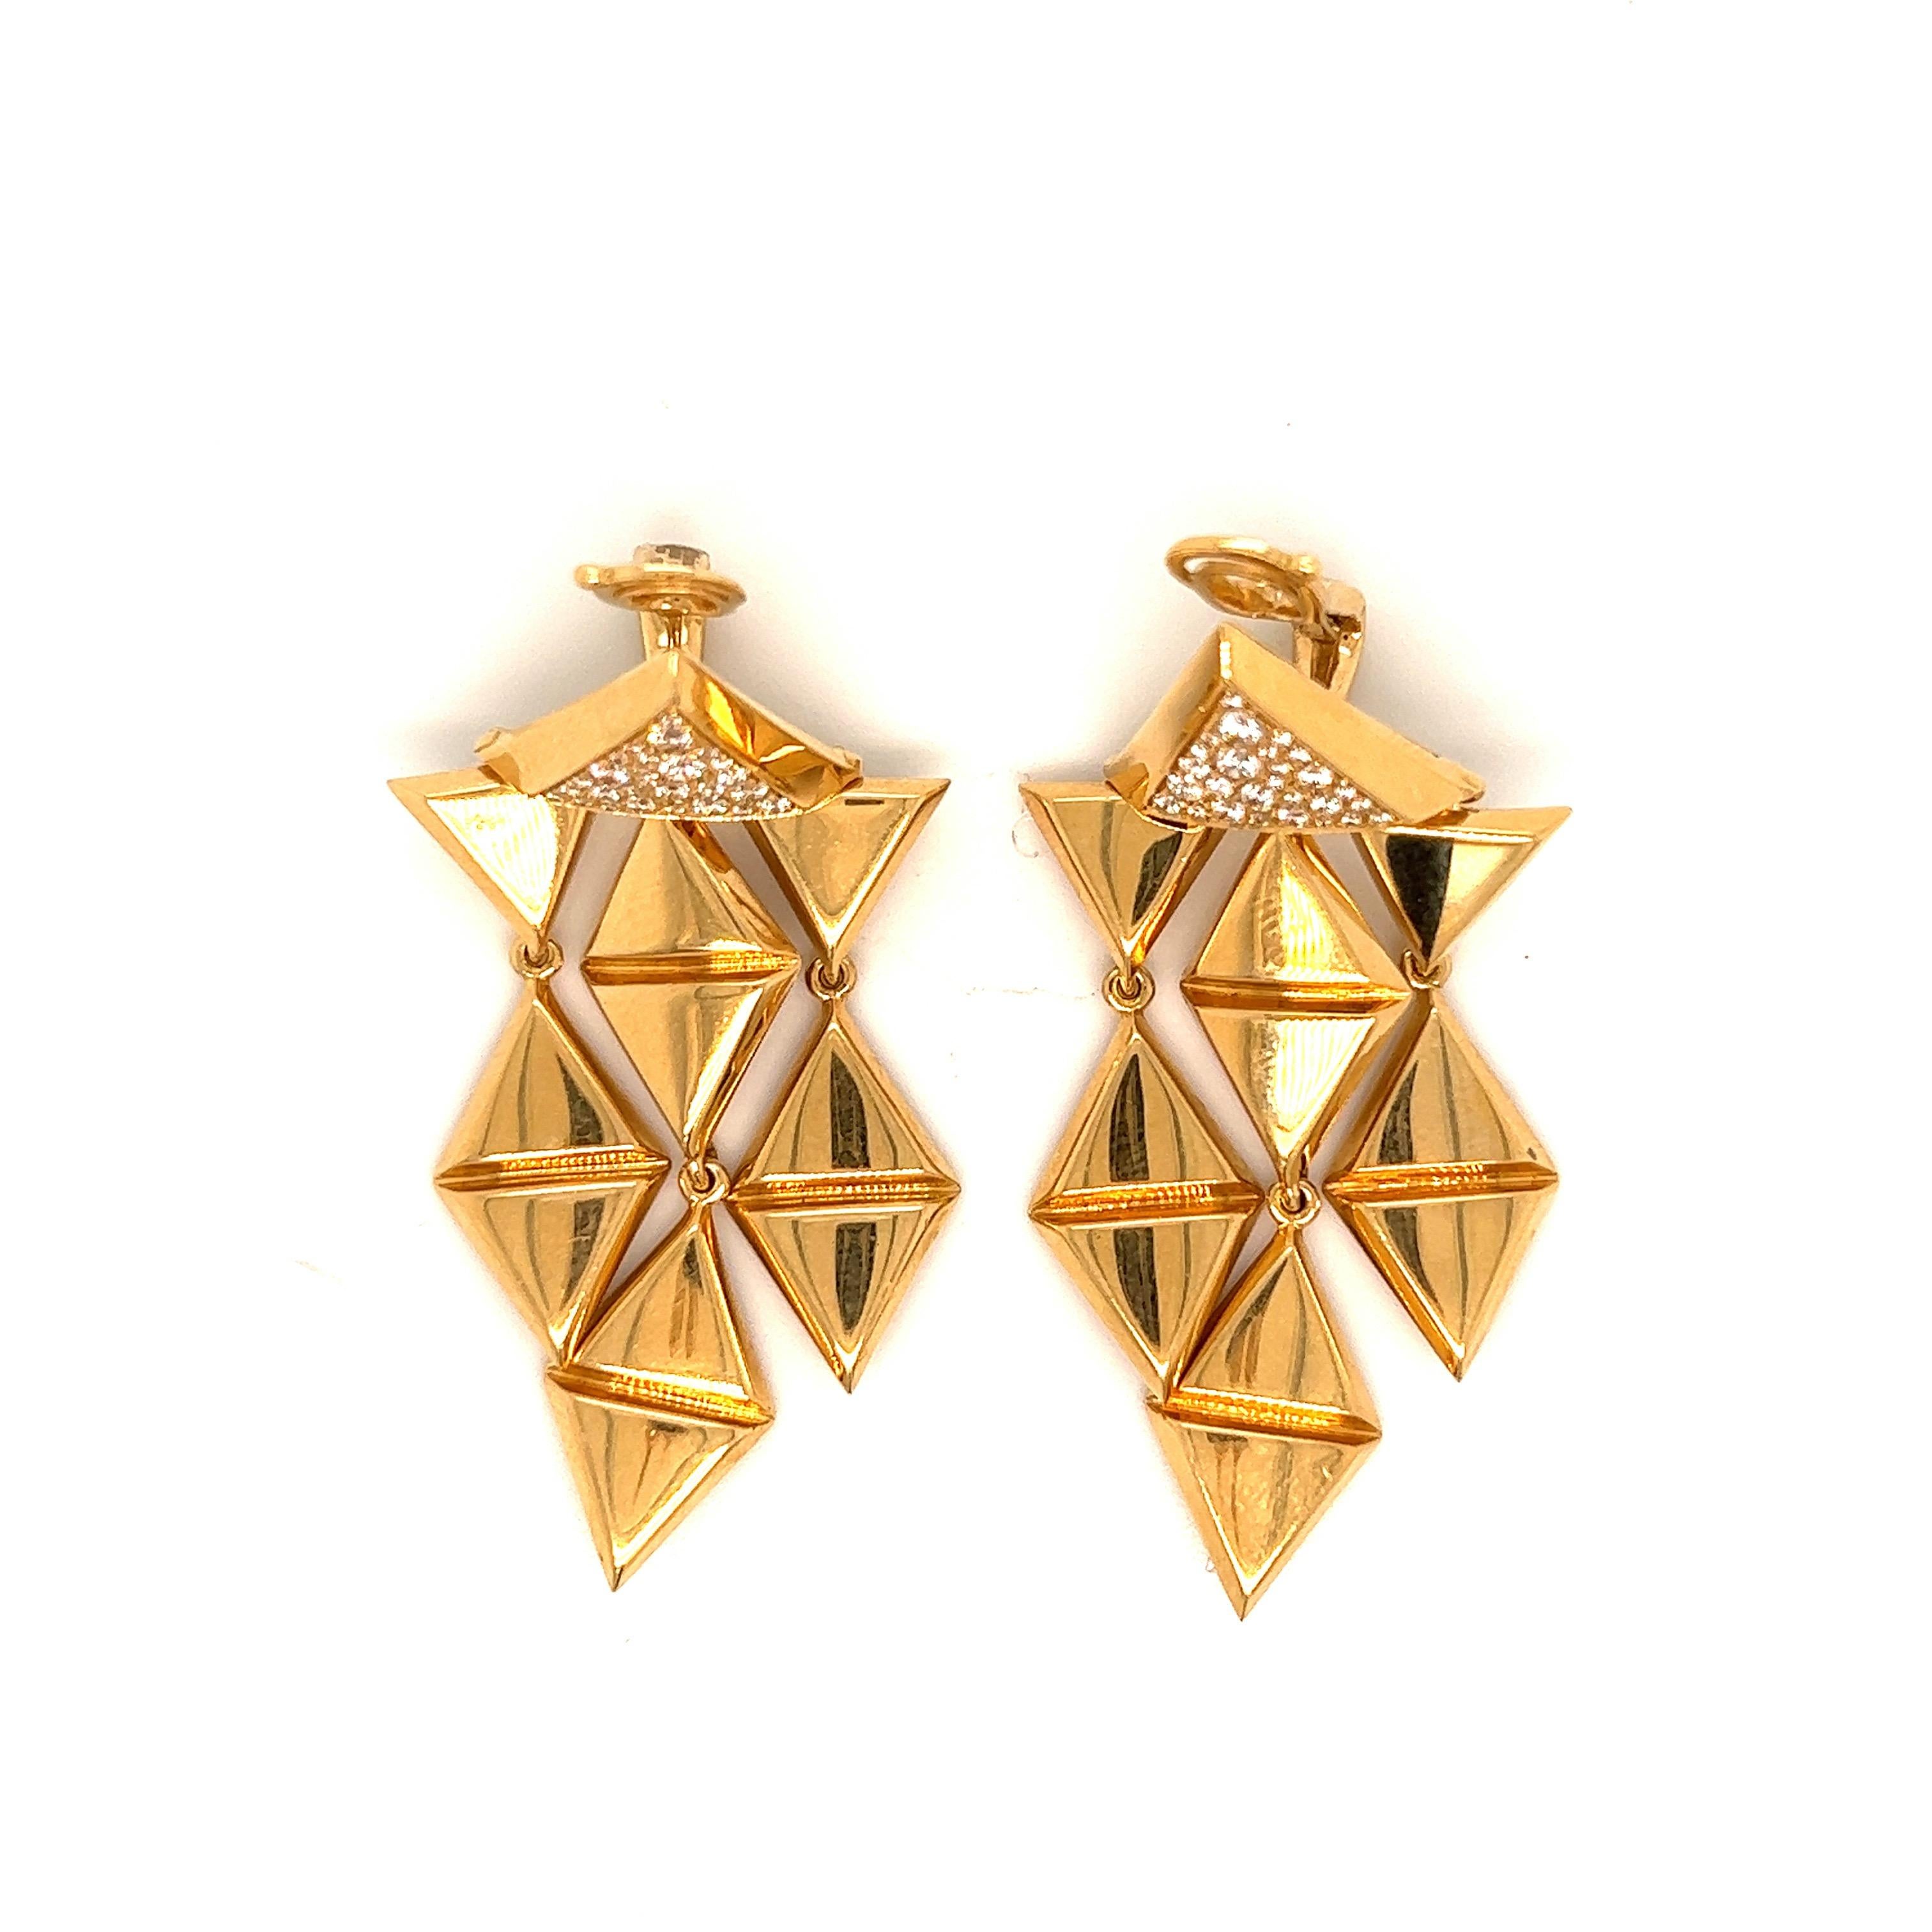 Marina B gold and diamond ear clips

Pavé-set diamonds with suspended cascades of triangular links, 18 karat yellow gold; marked Marina B, Italy, 750, 234067, 2294AL

Size: length 2.13 inches
Total weight: 21.9 grams